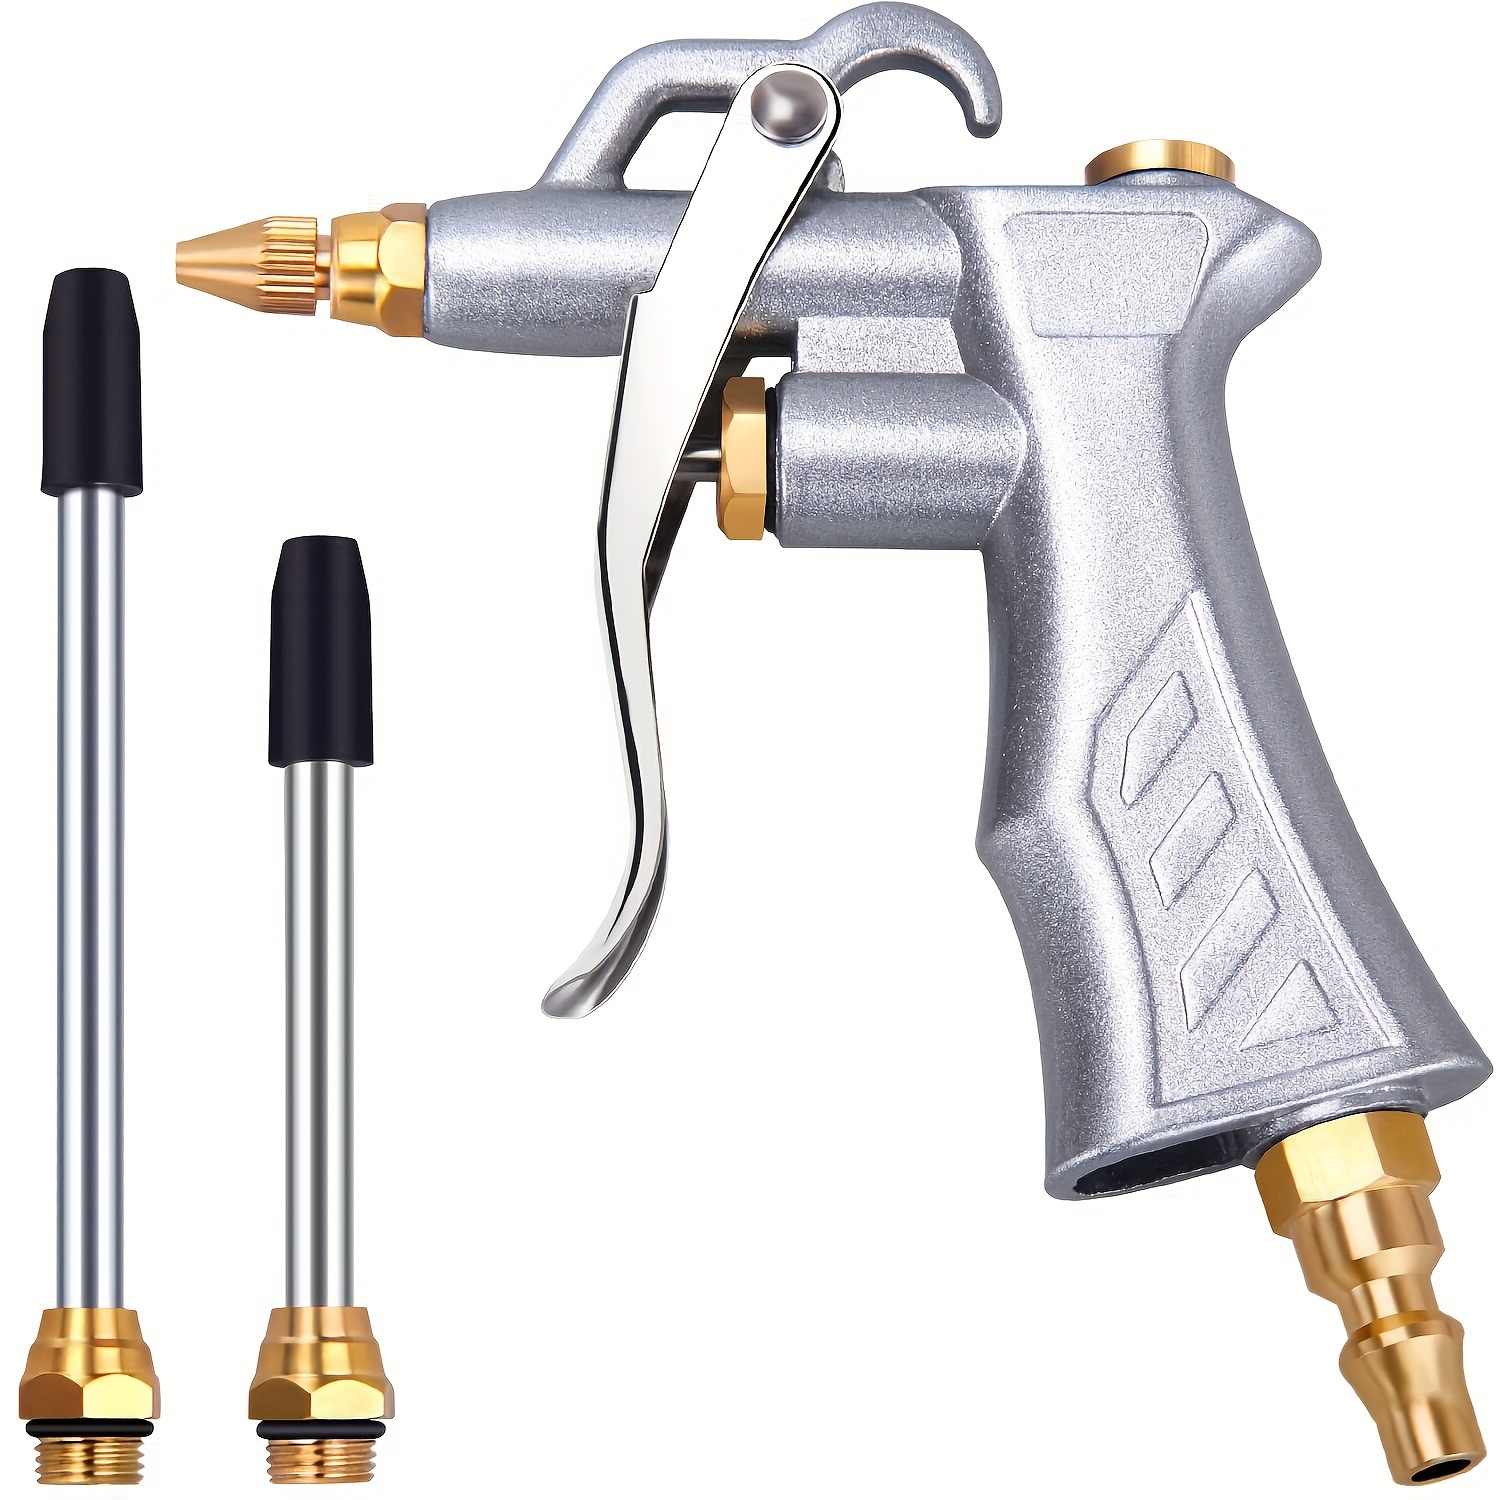 1/4 ADJUSTABLE HIGH FLOW AIR BLOW GUN WITH HIGH FLOW NOZZLE